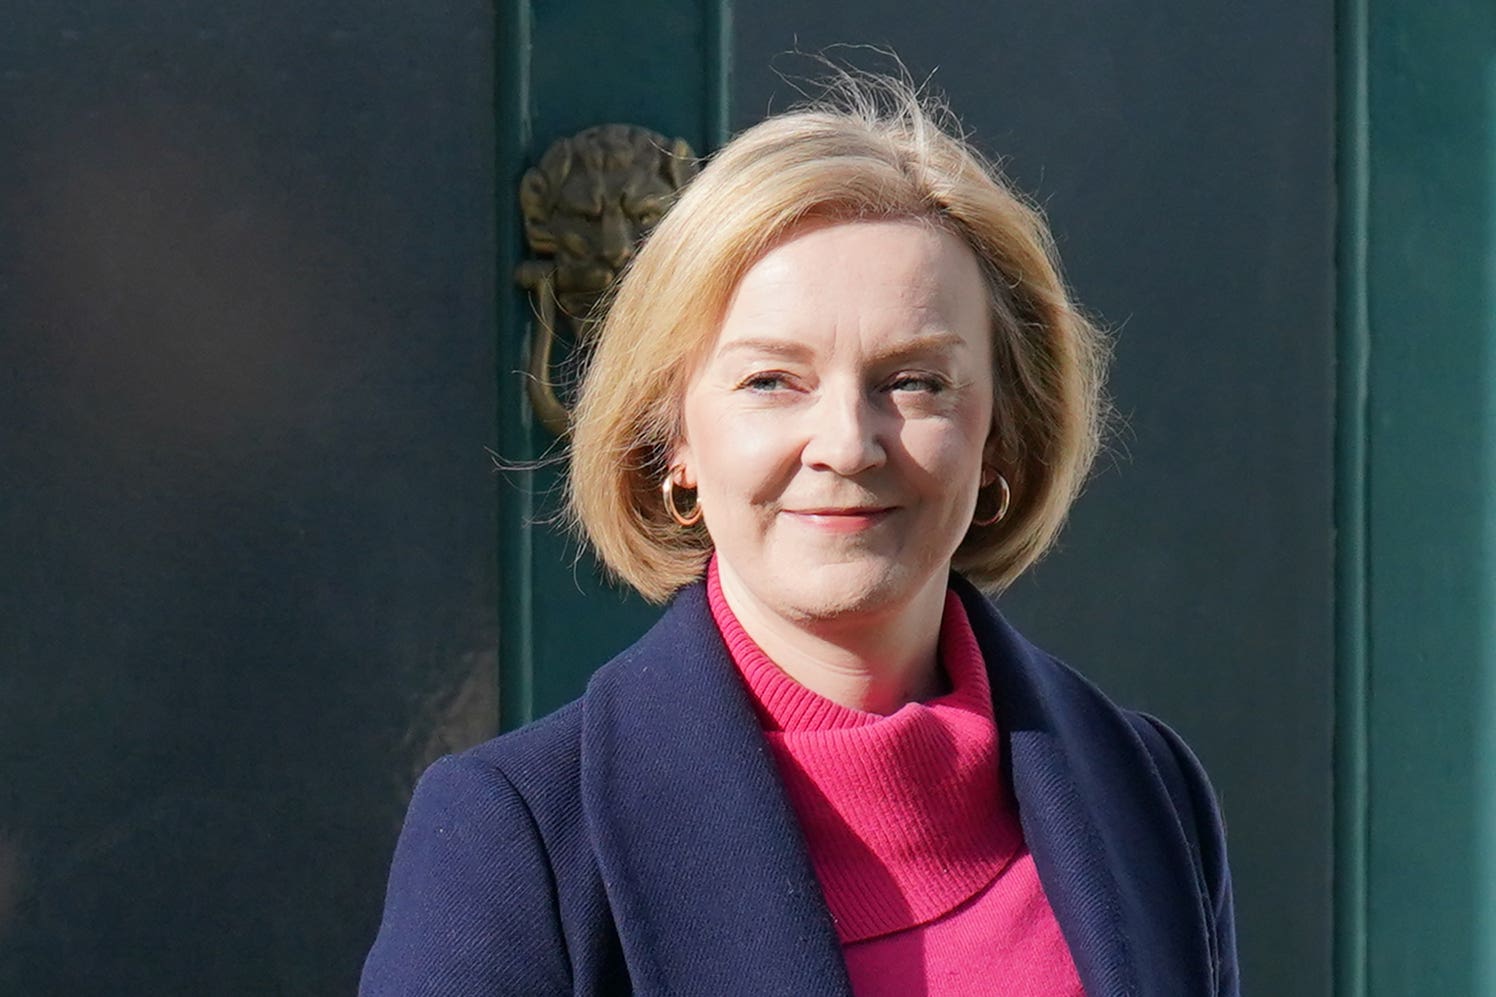 Liz Truss is said to have revived her reputation among some senior Tories